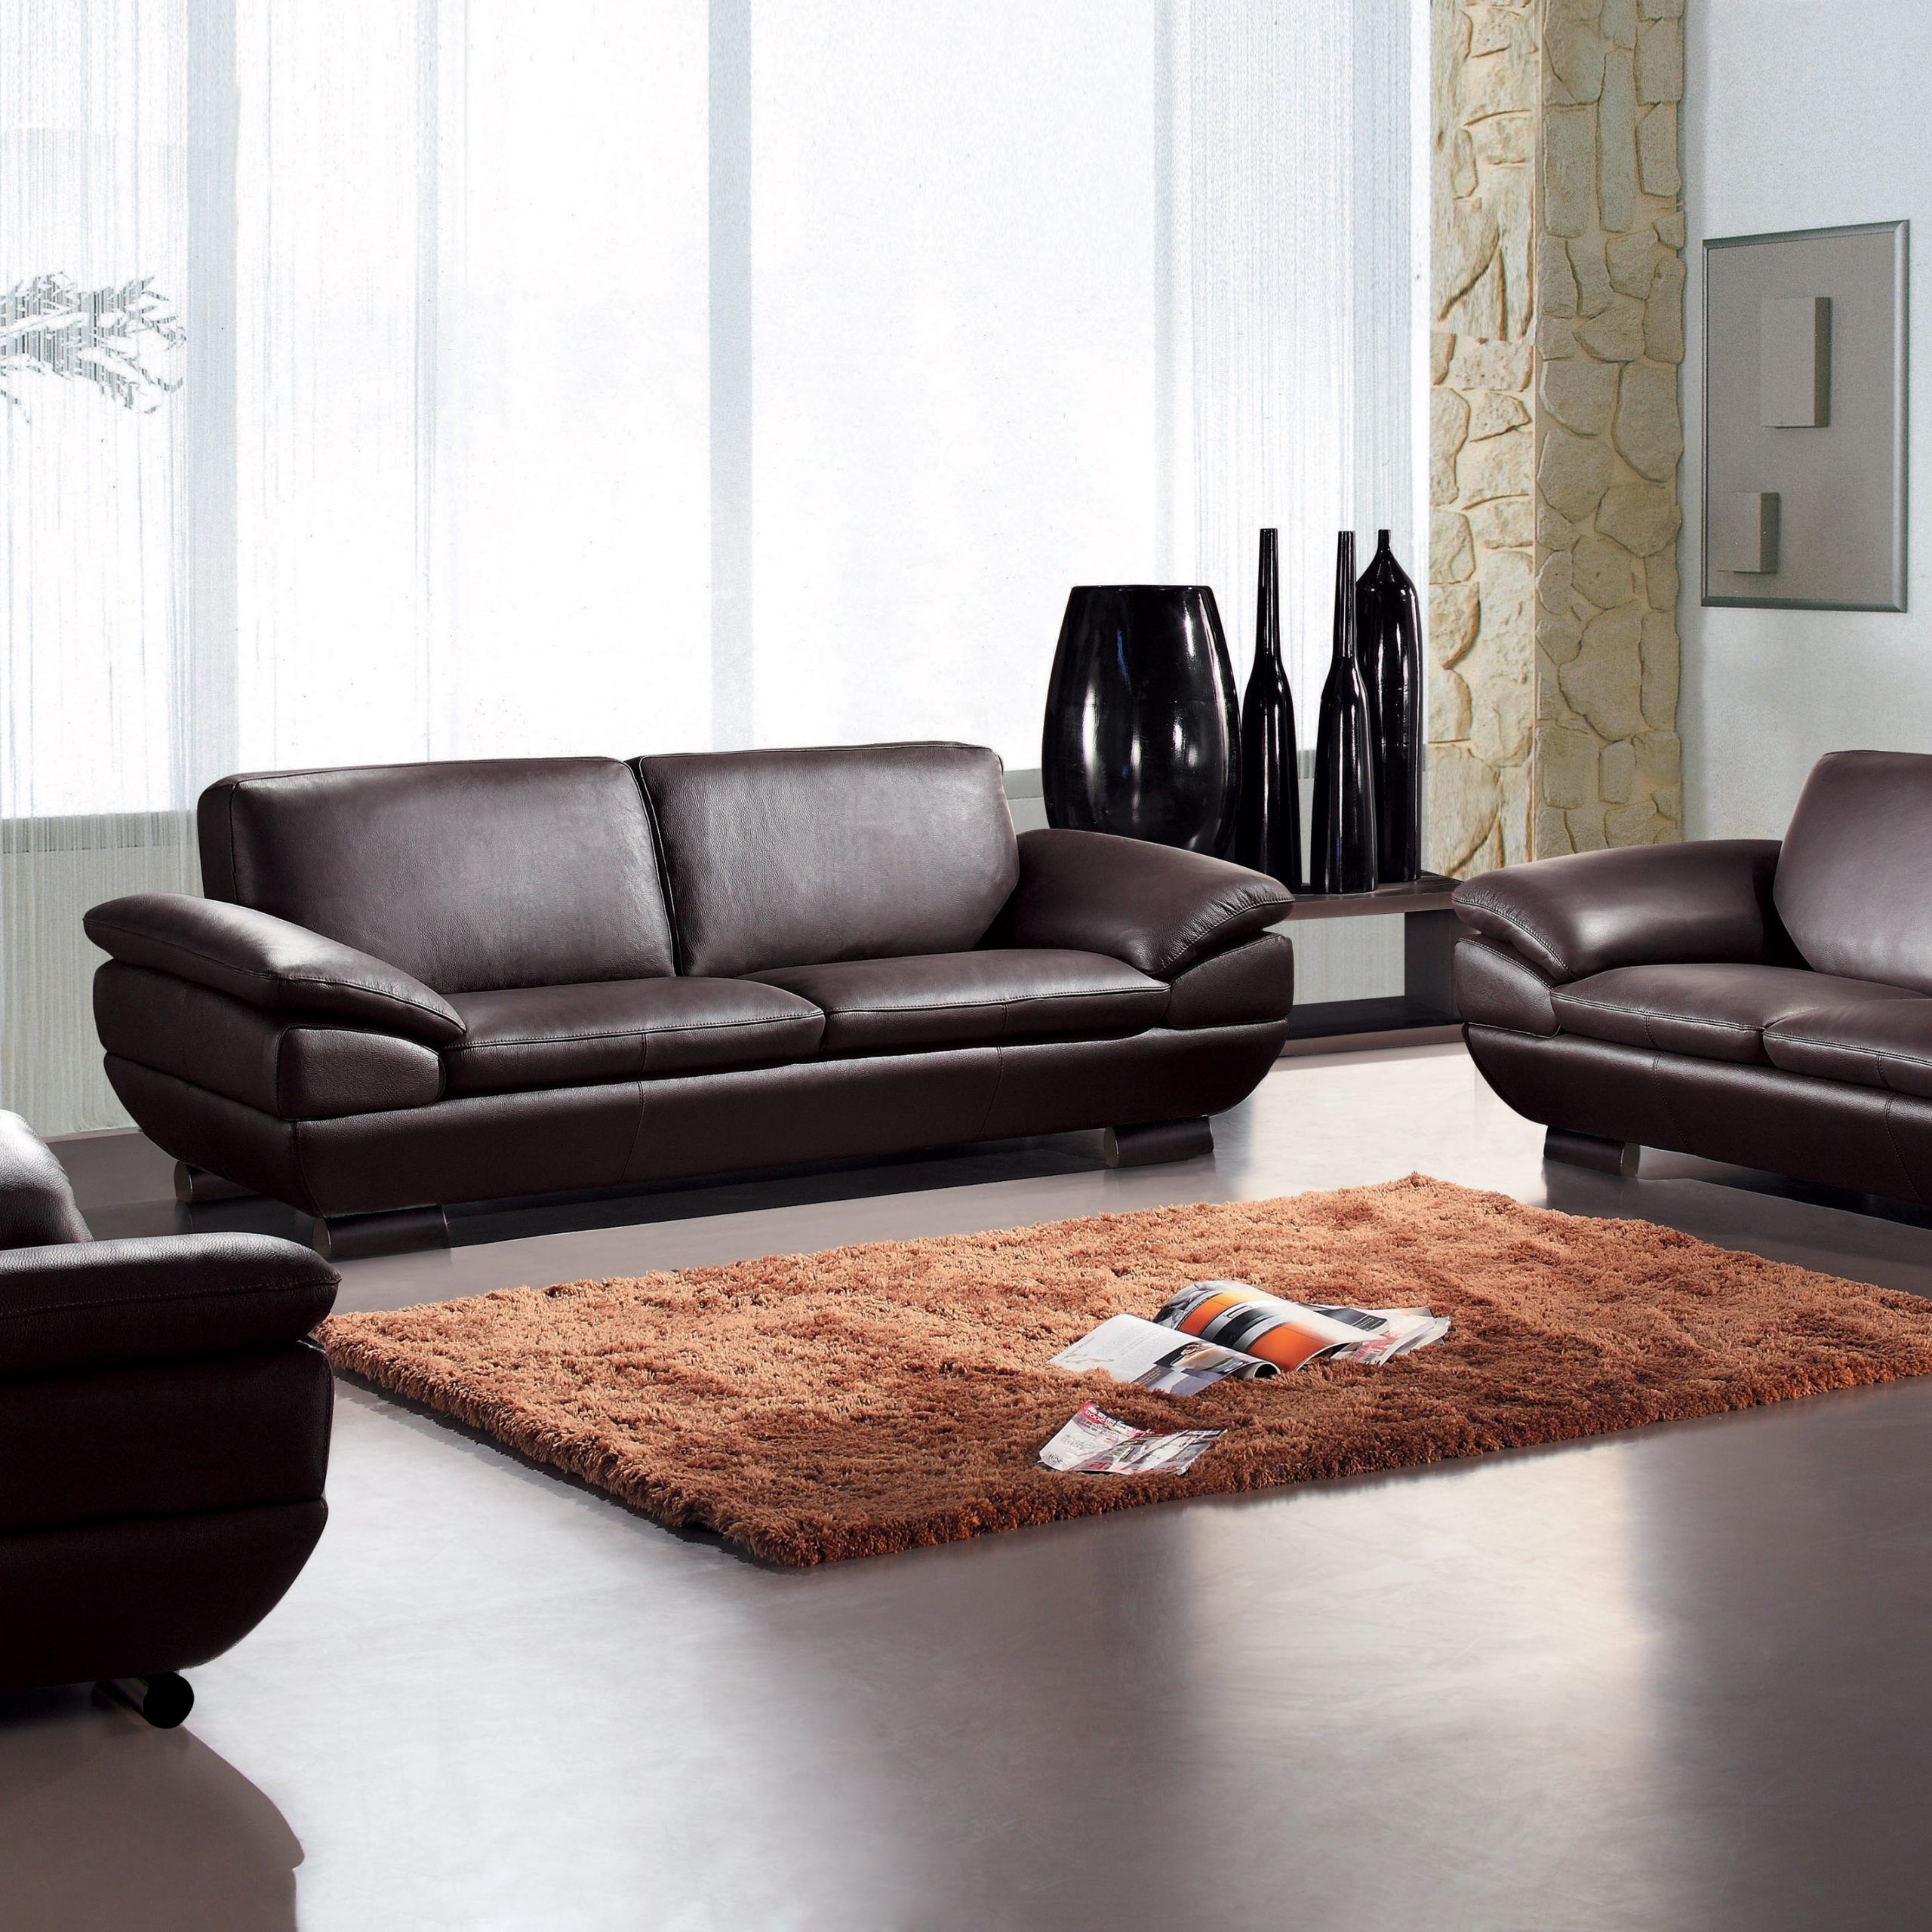 Contemporary Three Piece Sofa Set In Dark Brown Leather Atlanta Georgia Inside 3 Piece Leather Sectional Sofa Sets (Gallery 17 of 20)